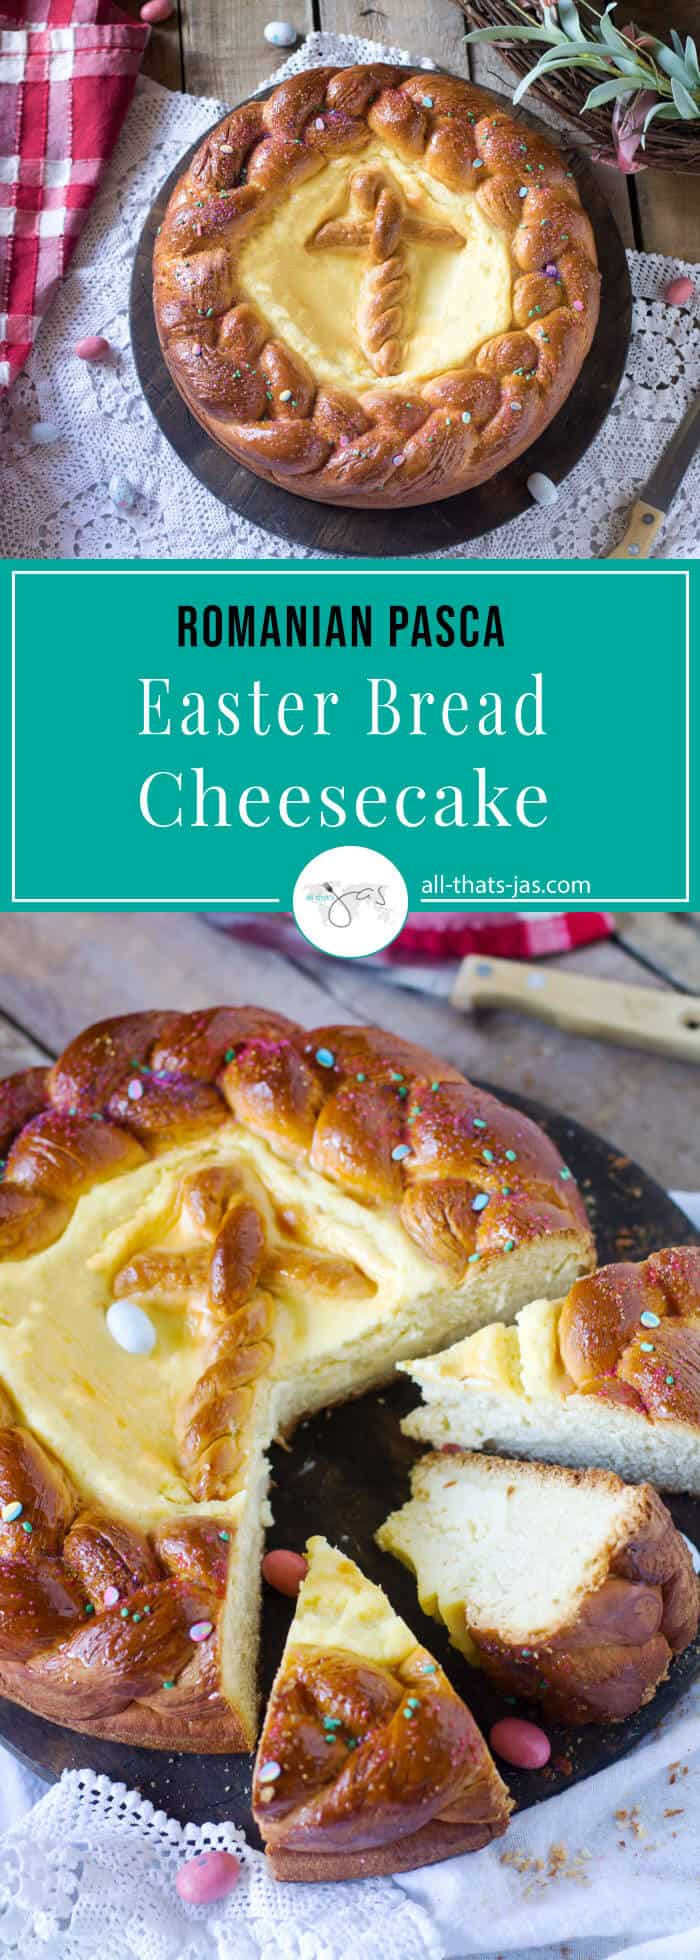 Romanian Easter Bread
 Easter Bread Cheesecake Romanian Pasca